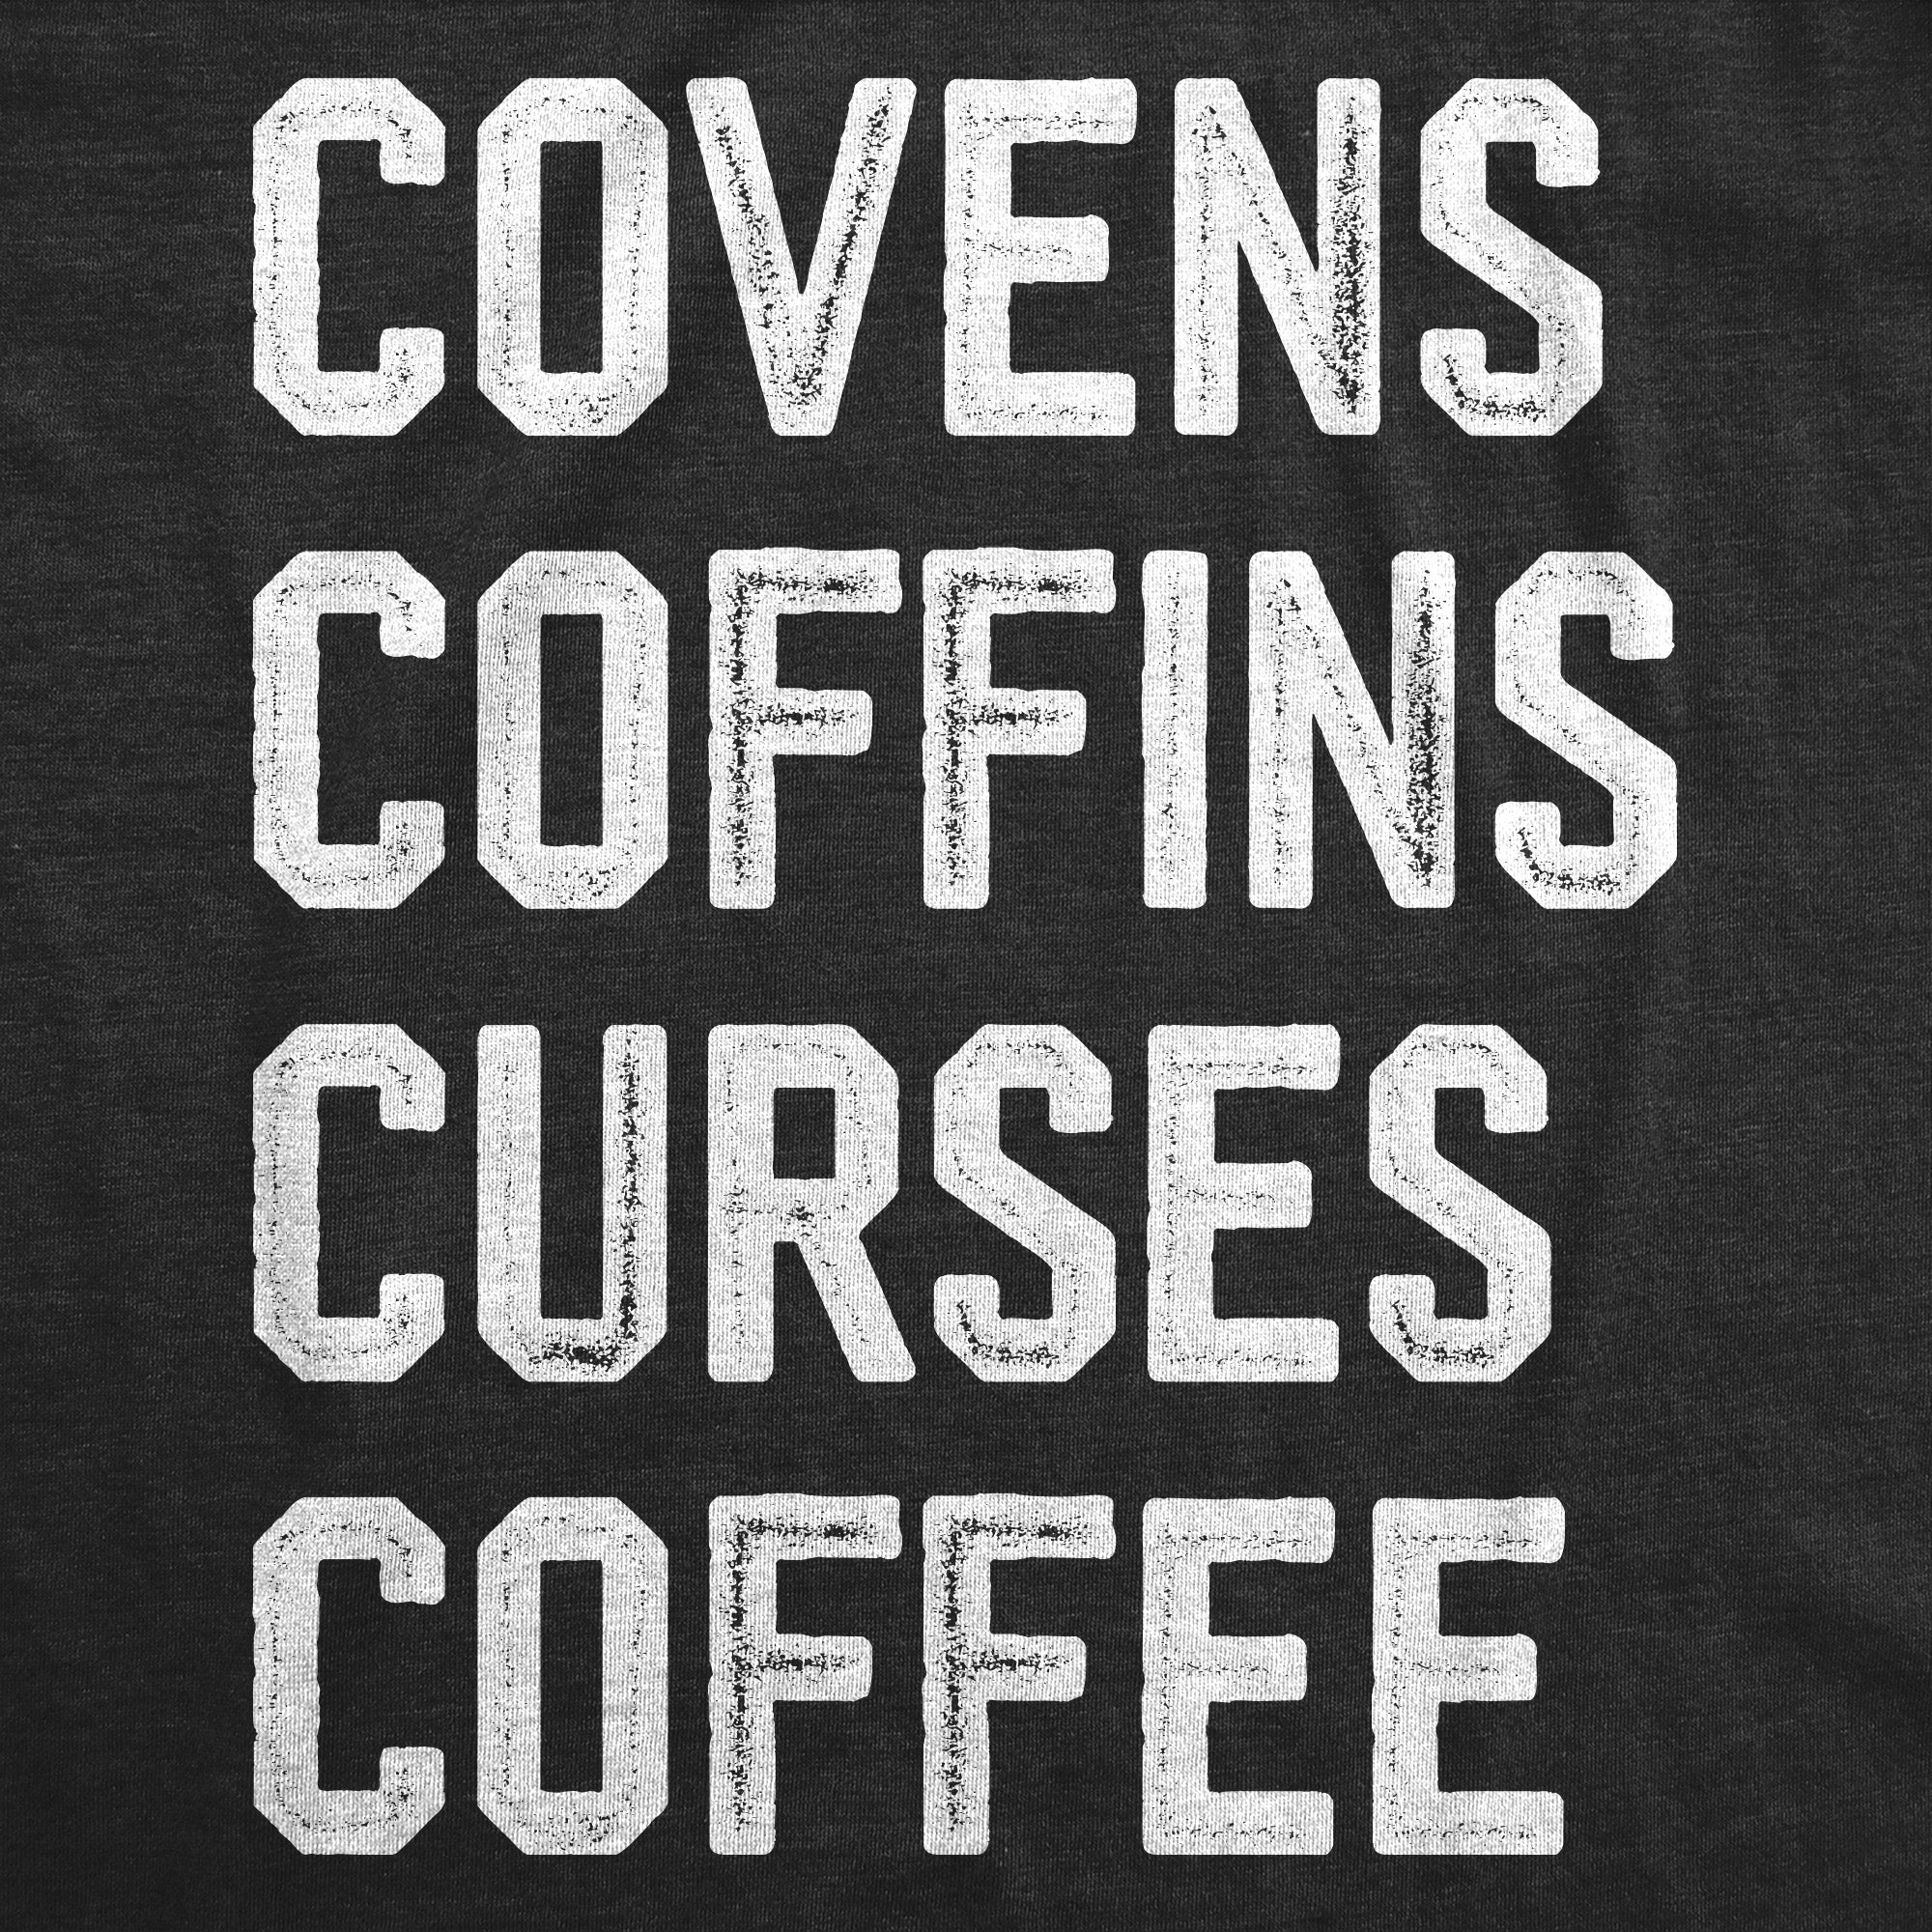 Funny Heather Black - COVENS Covens Coffins Curses Coffee Womens T Shirt Nerdy Halloween coffee Tee